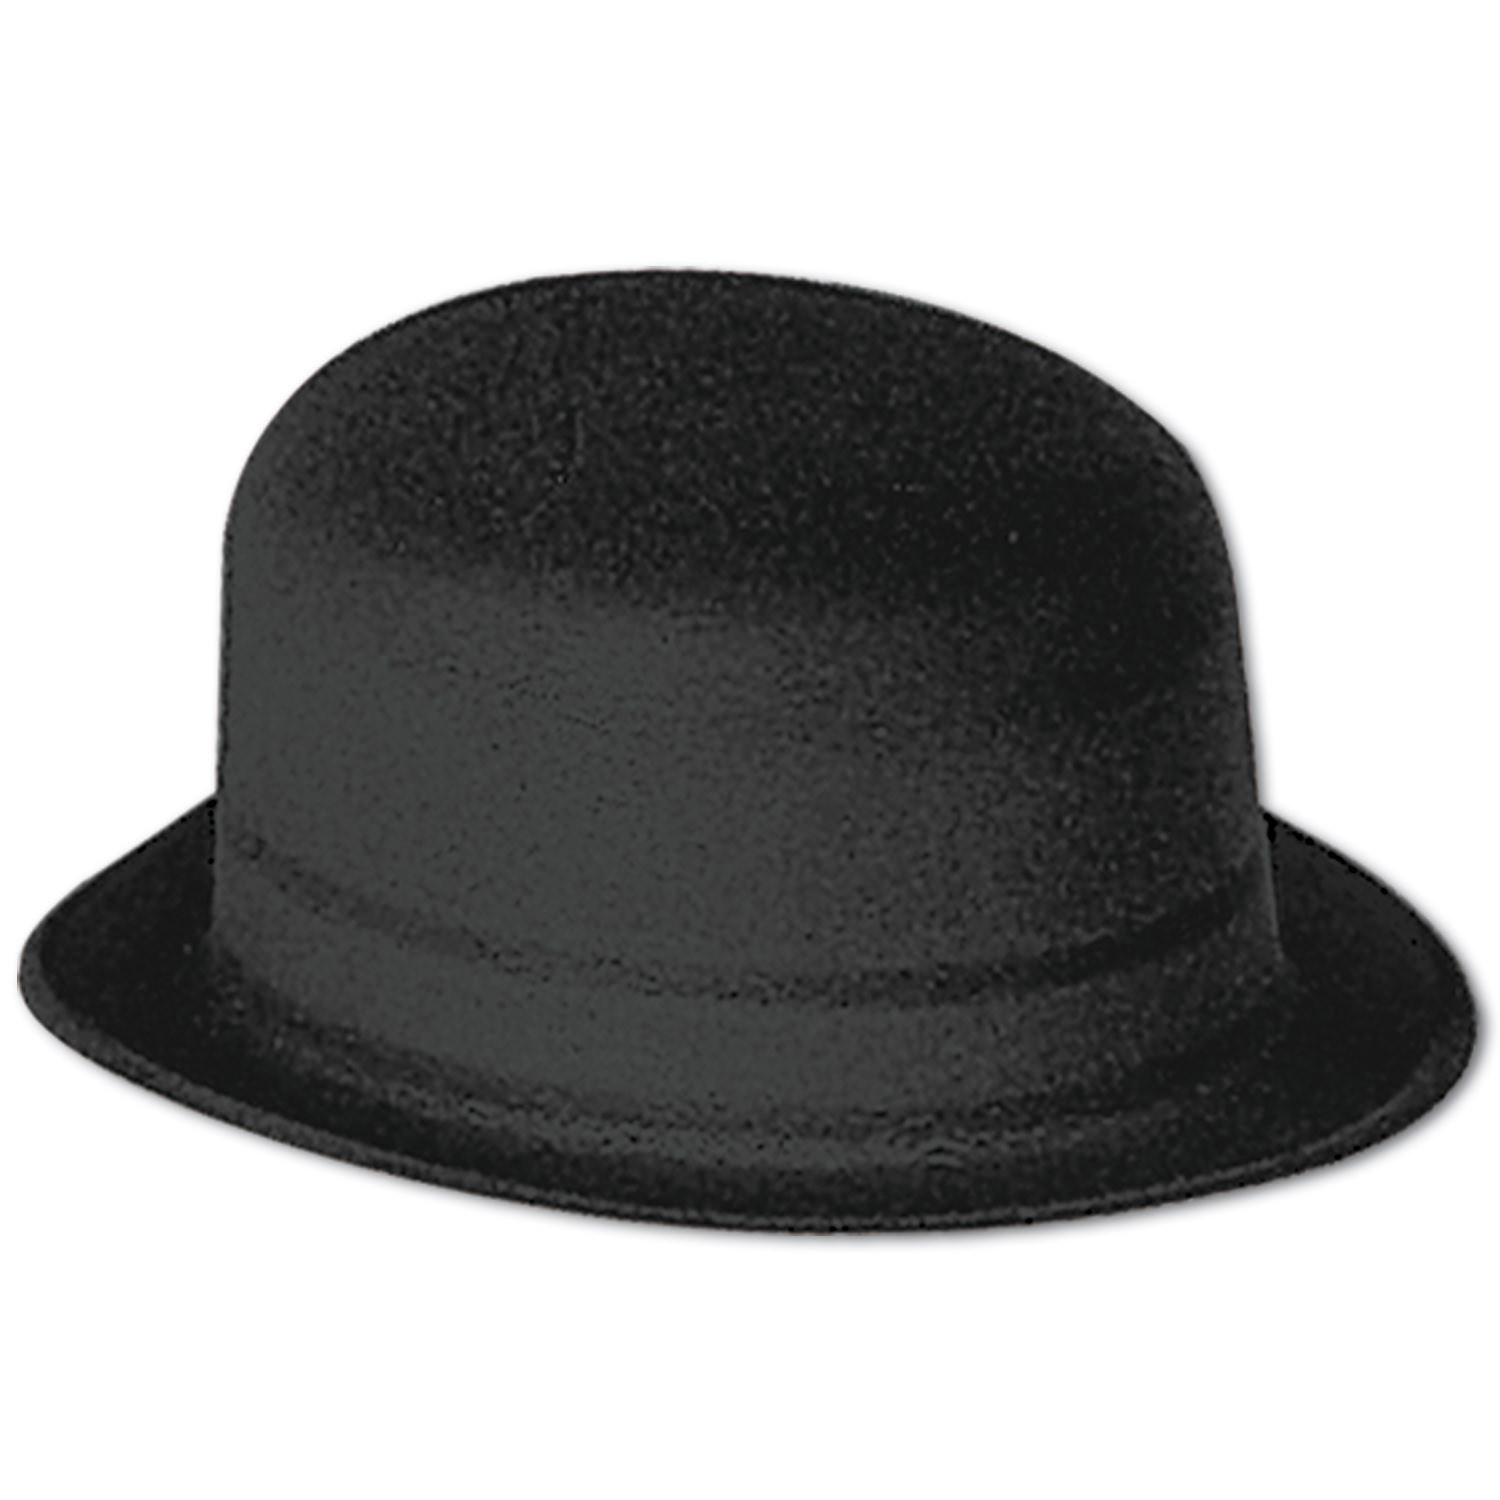 Black velour derby made with plastic material and covered in a velour coating.